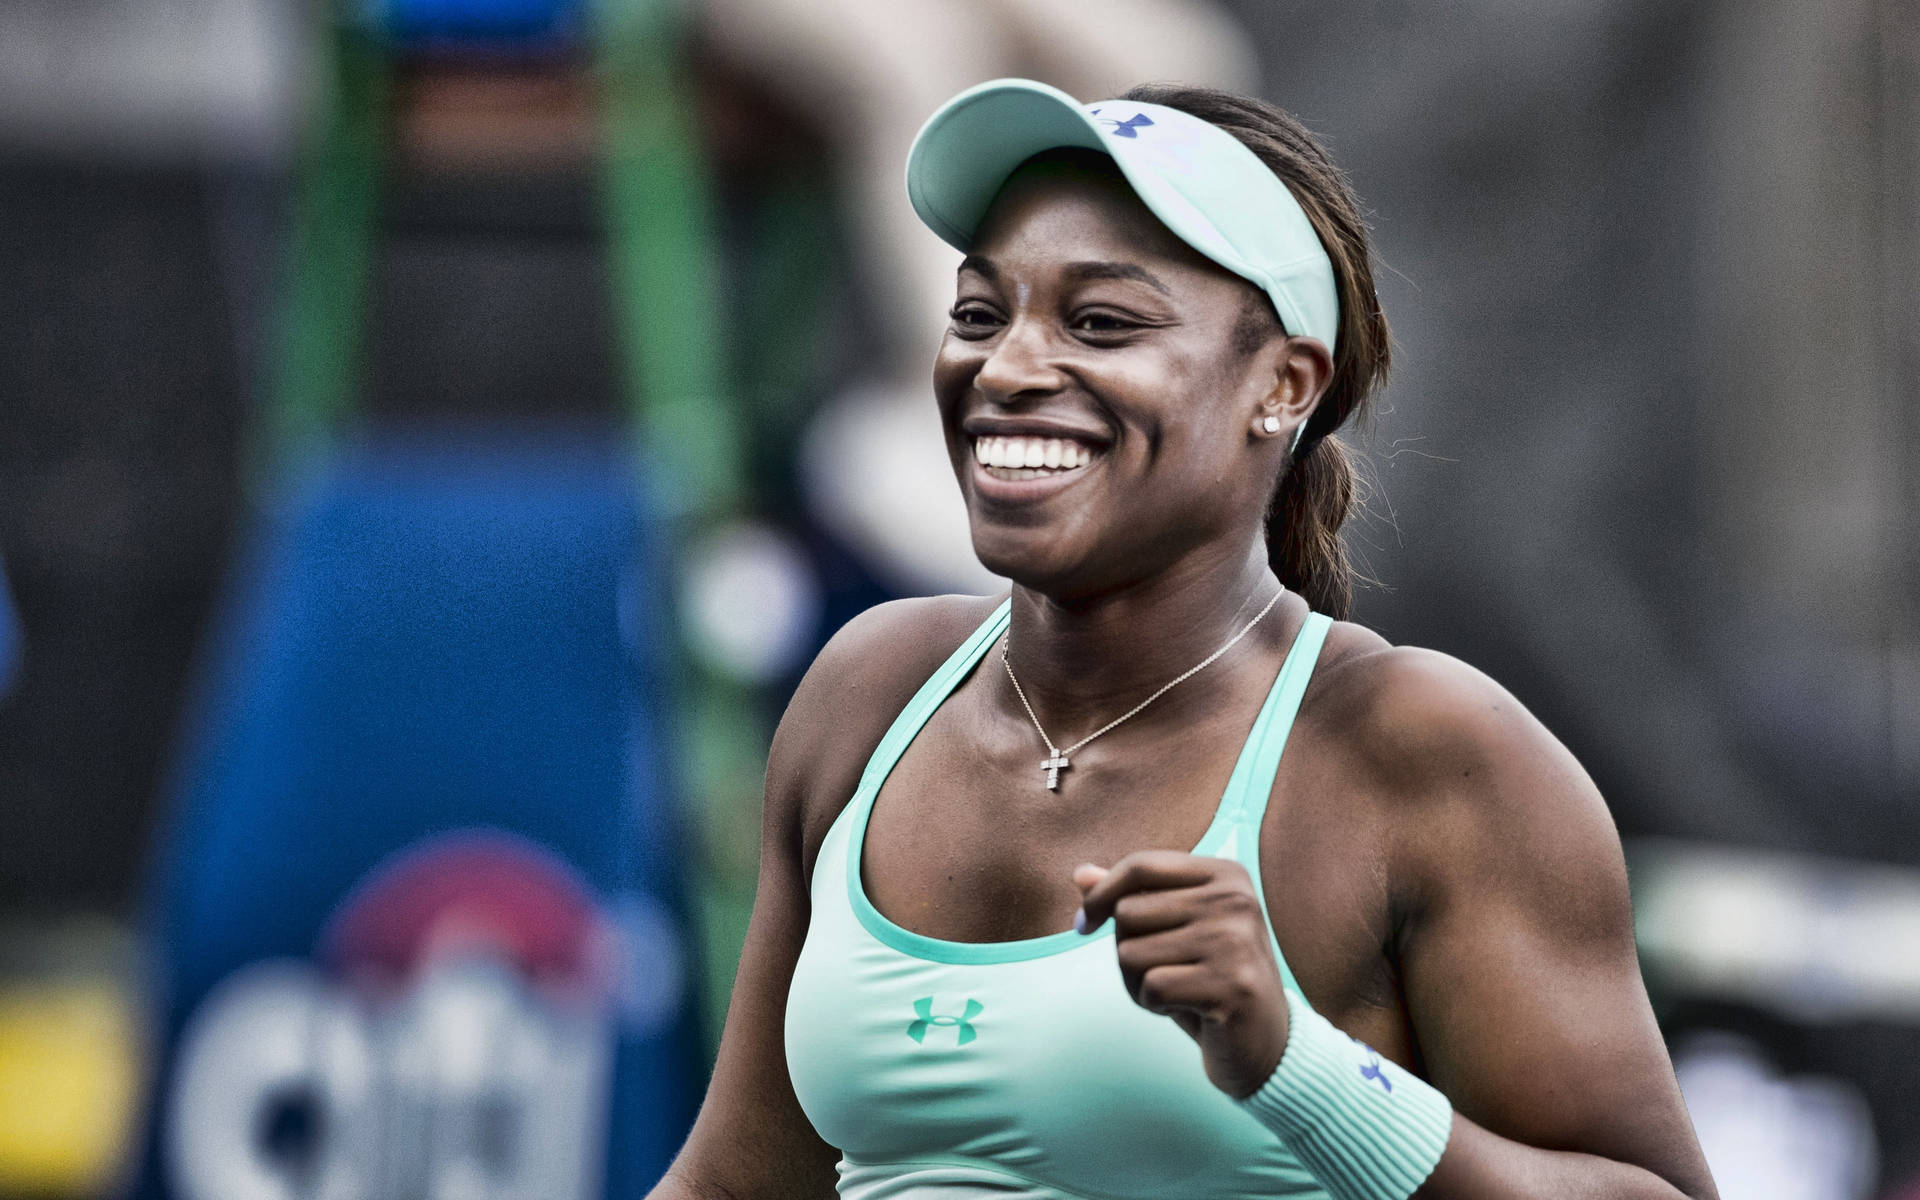 Sloane Stephens In Green Outfit Smiling Wallpaper